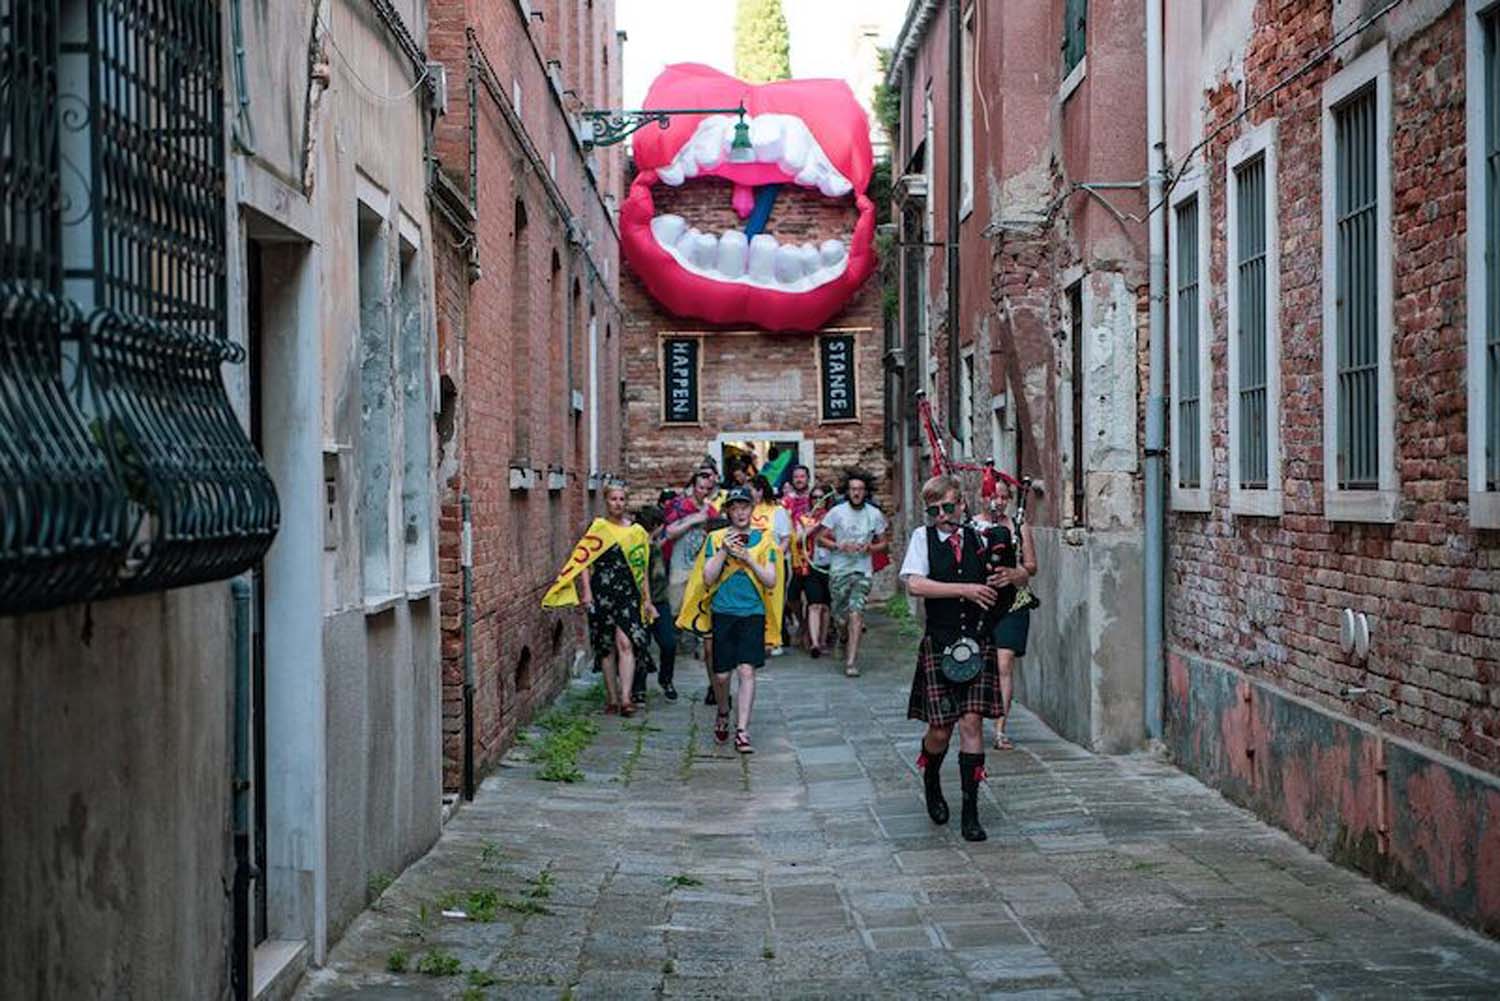 A group of people walk behind a young man playing the bagpipes down a narrow lane of stone buildings with a large inflatable smiling mouth visible in the background